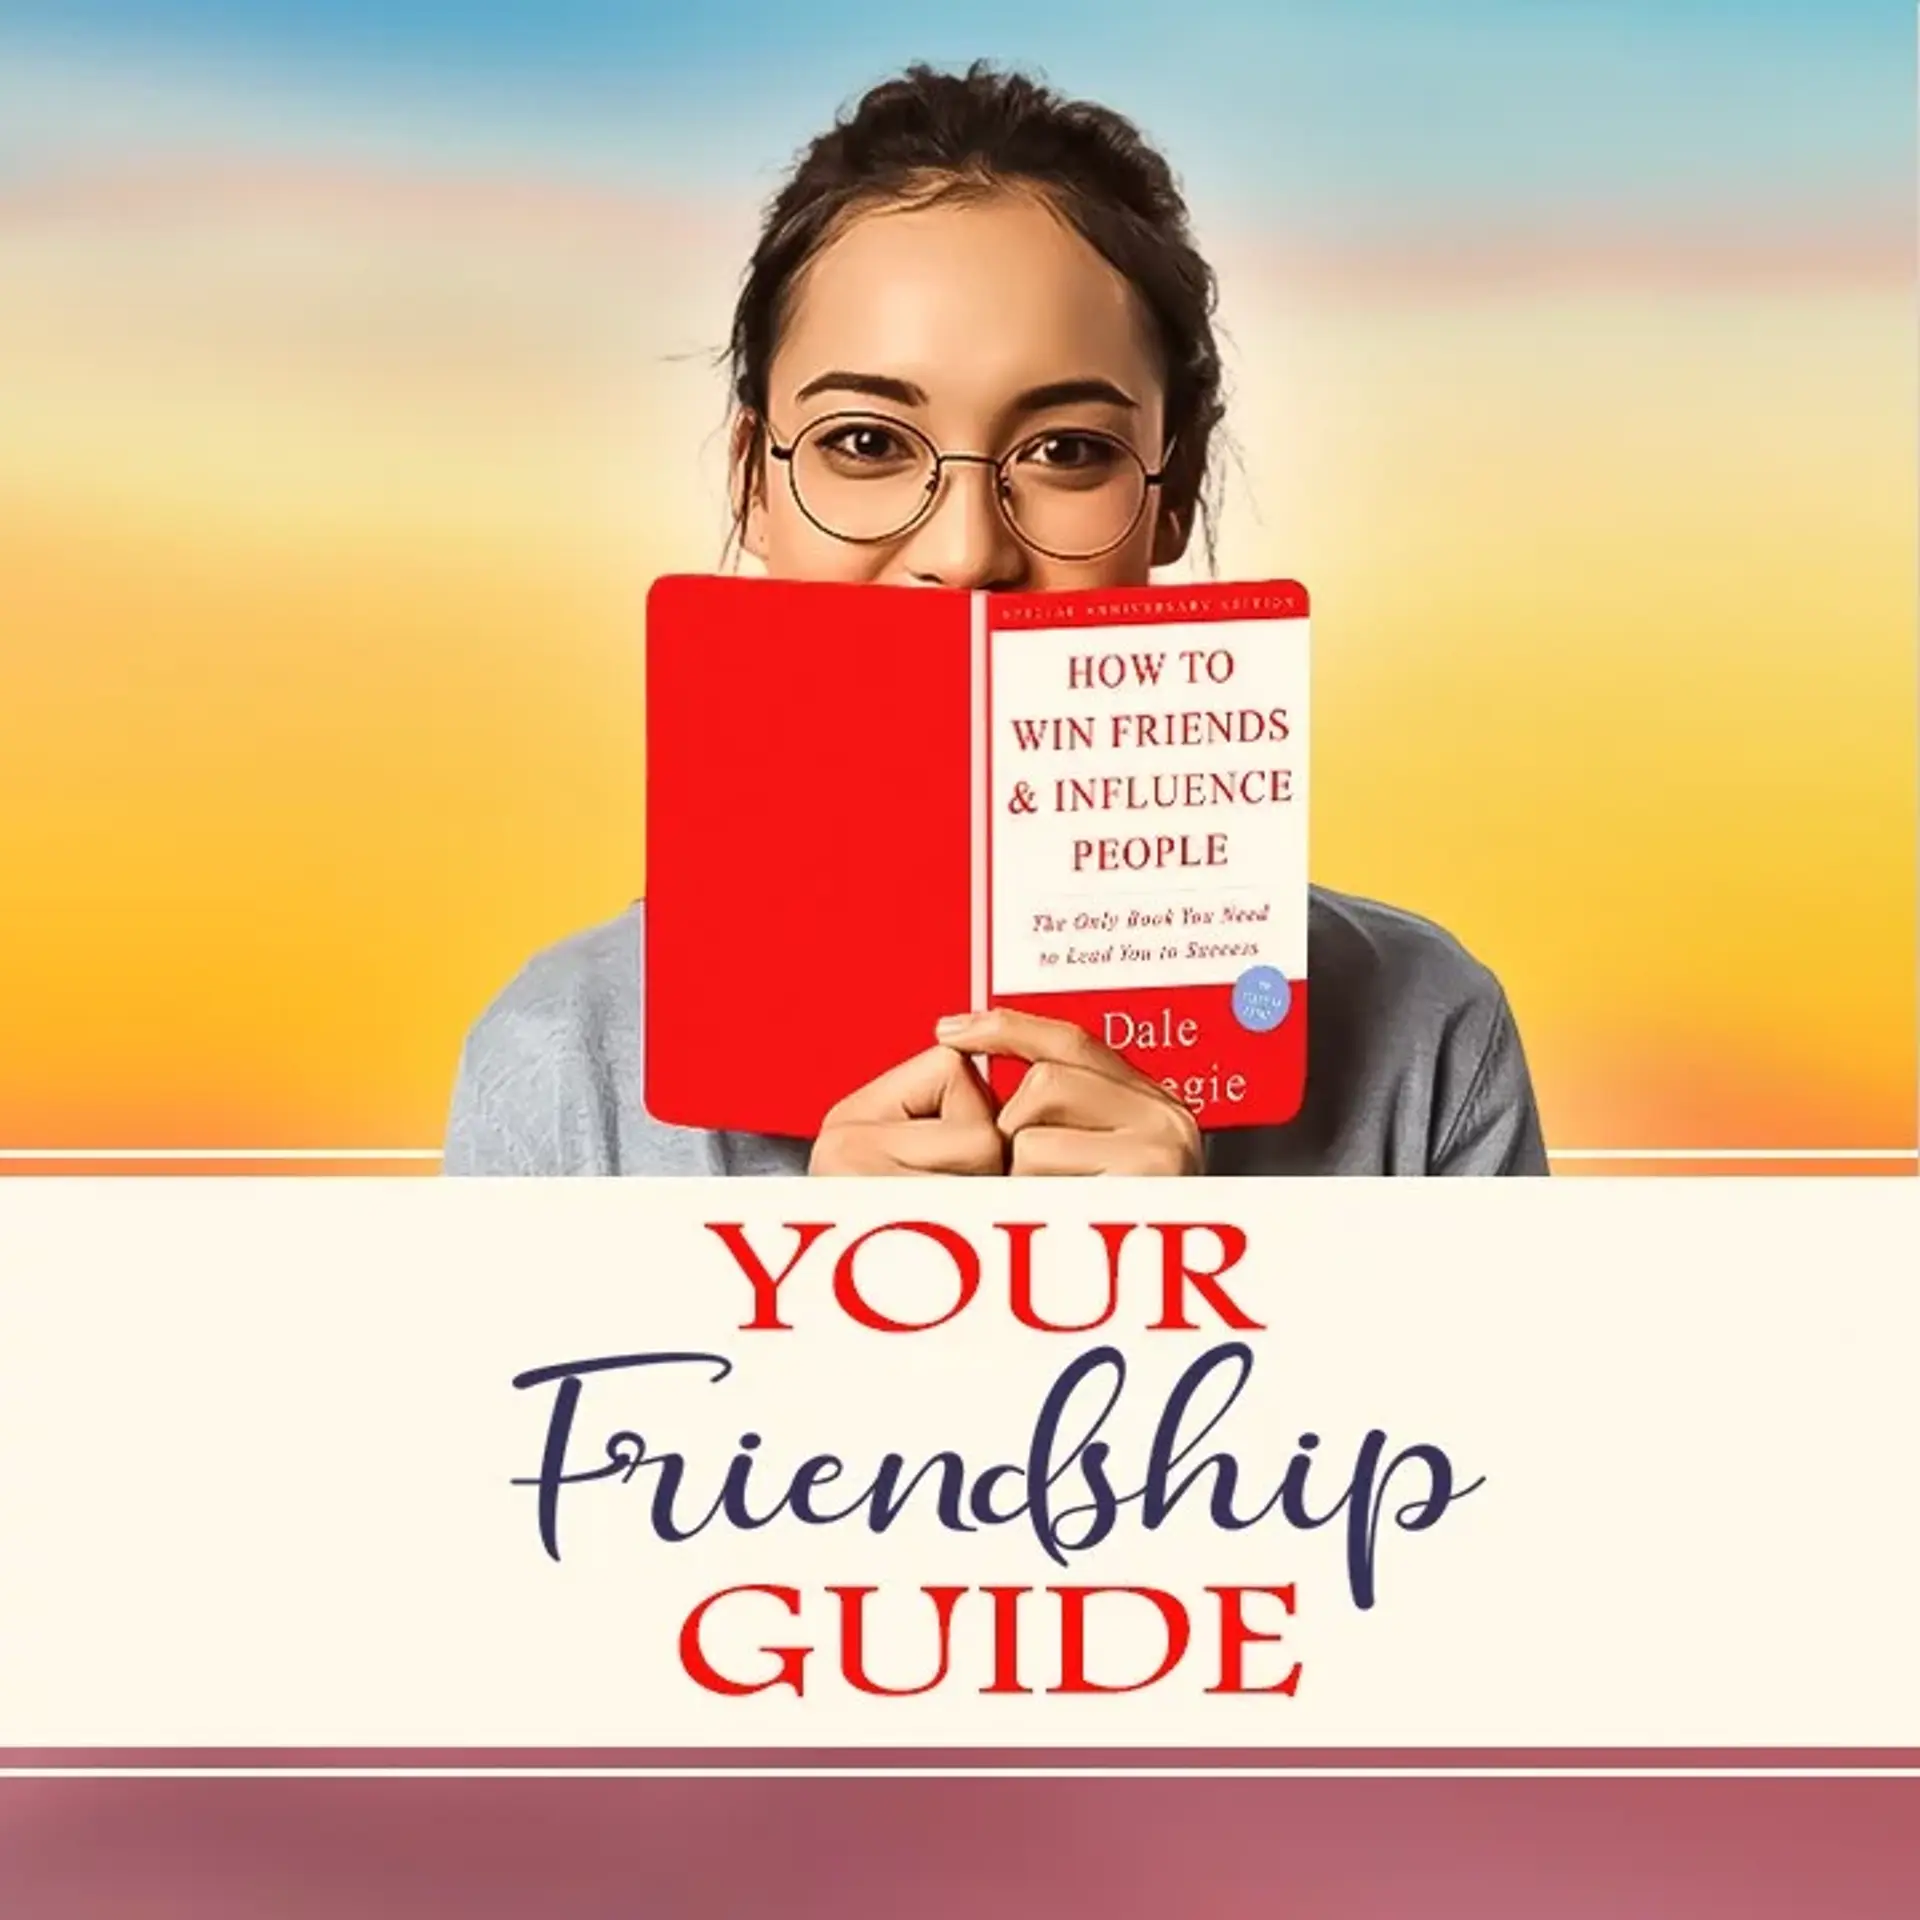 Your friendship guide | 